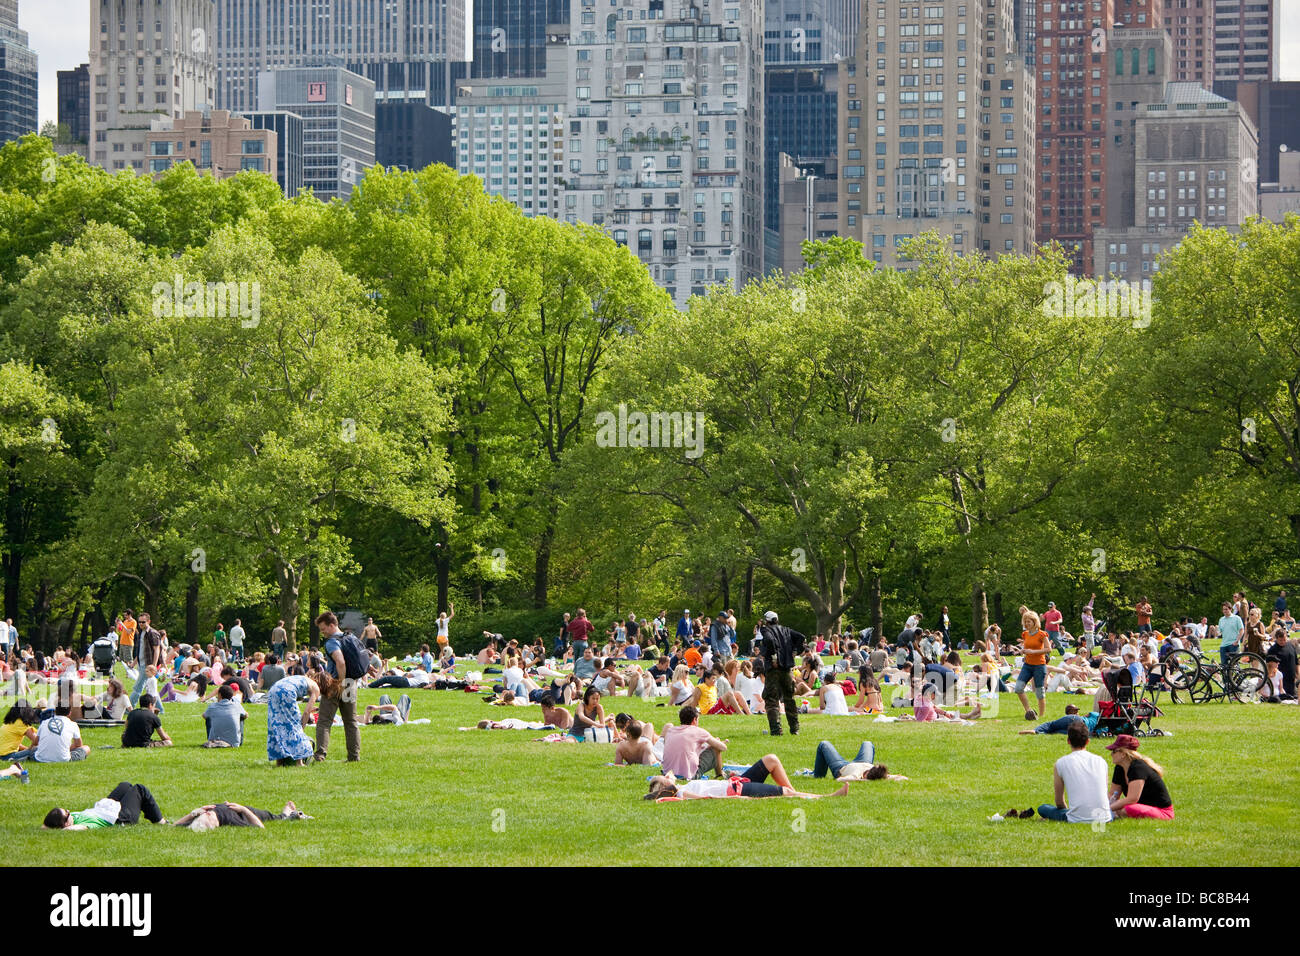 Sheep Meadow in Central Park in New York City Stock Photo